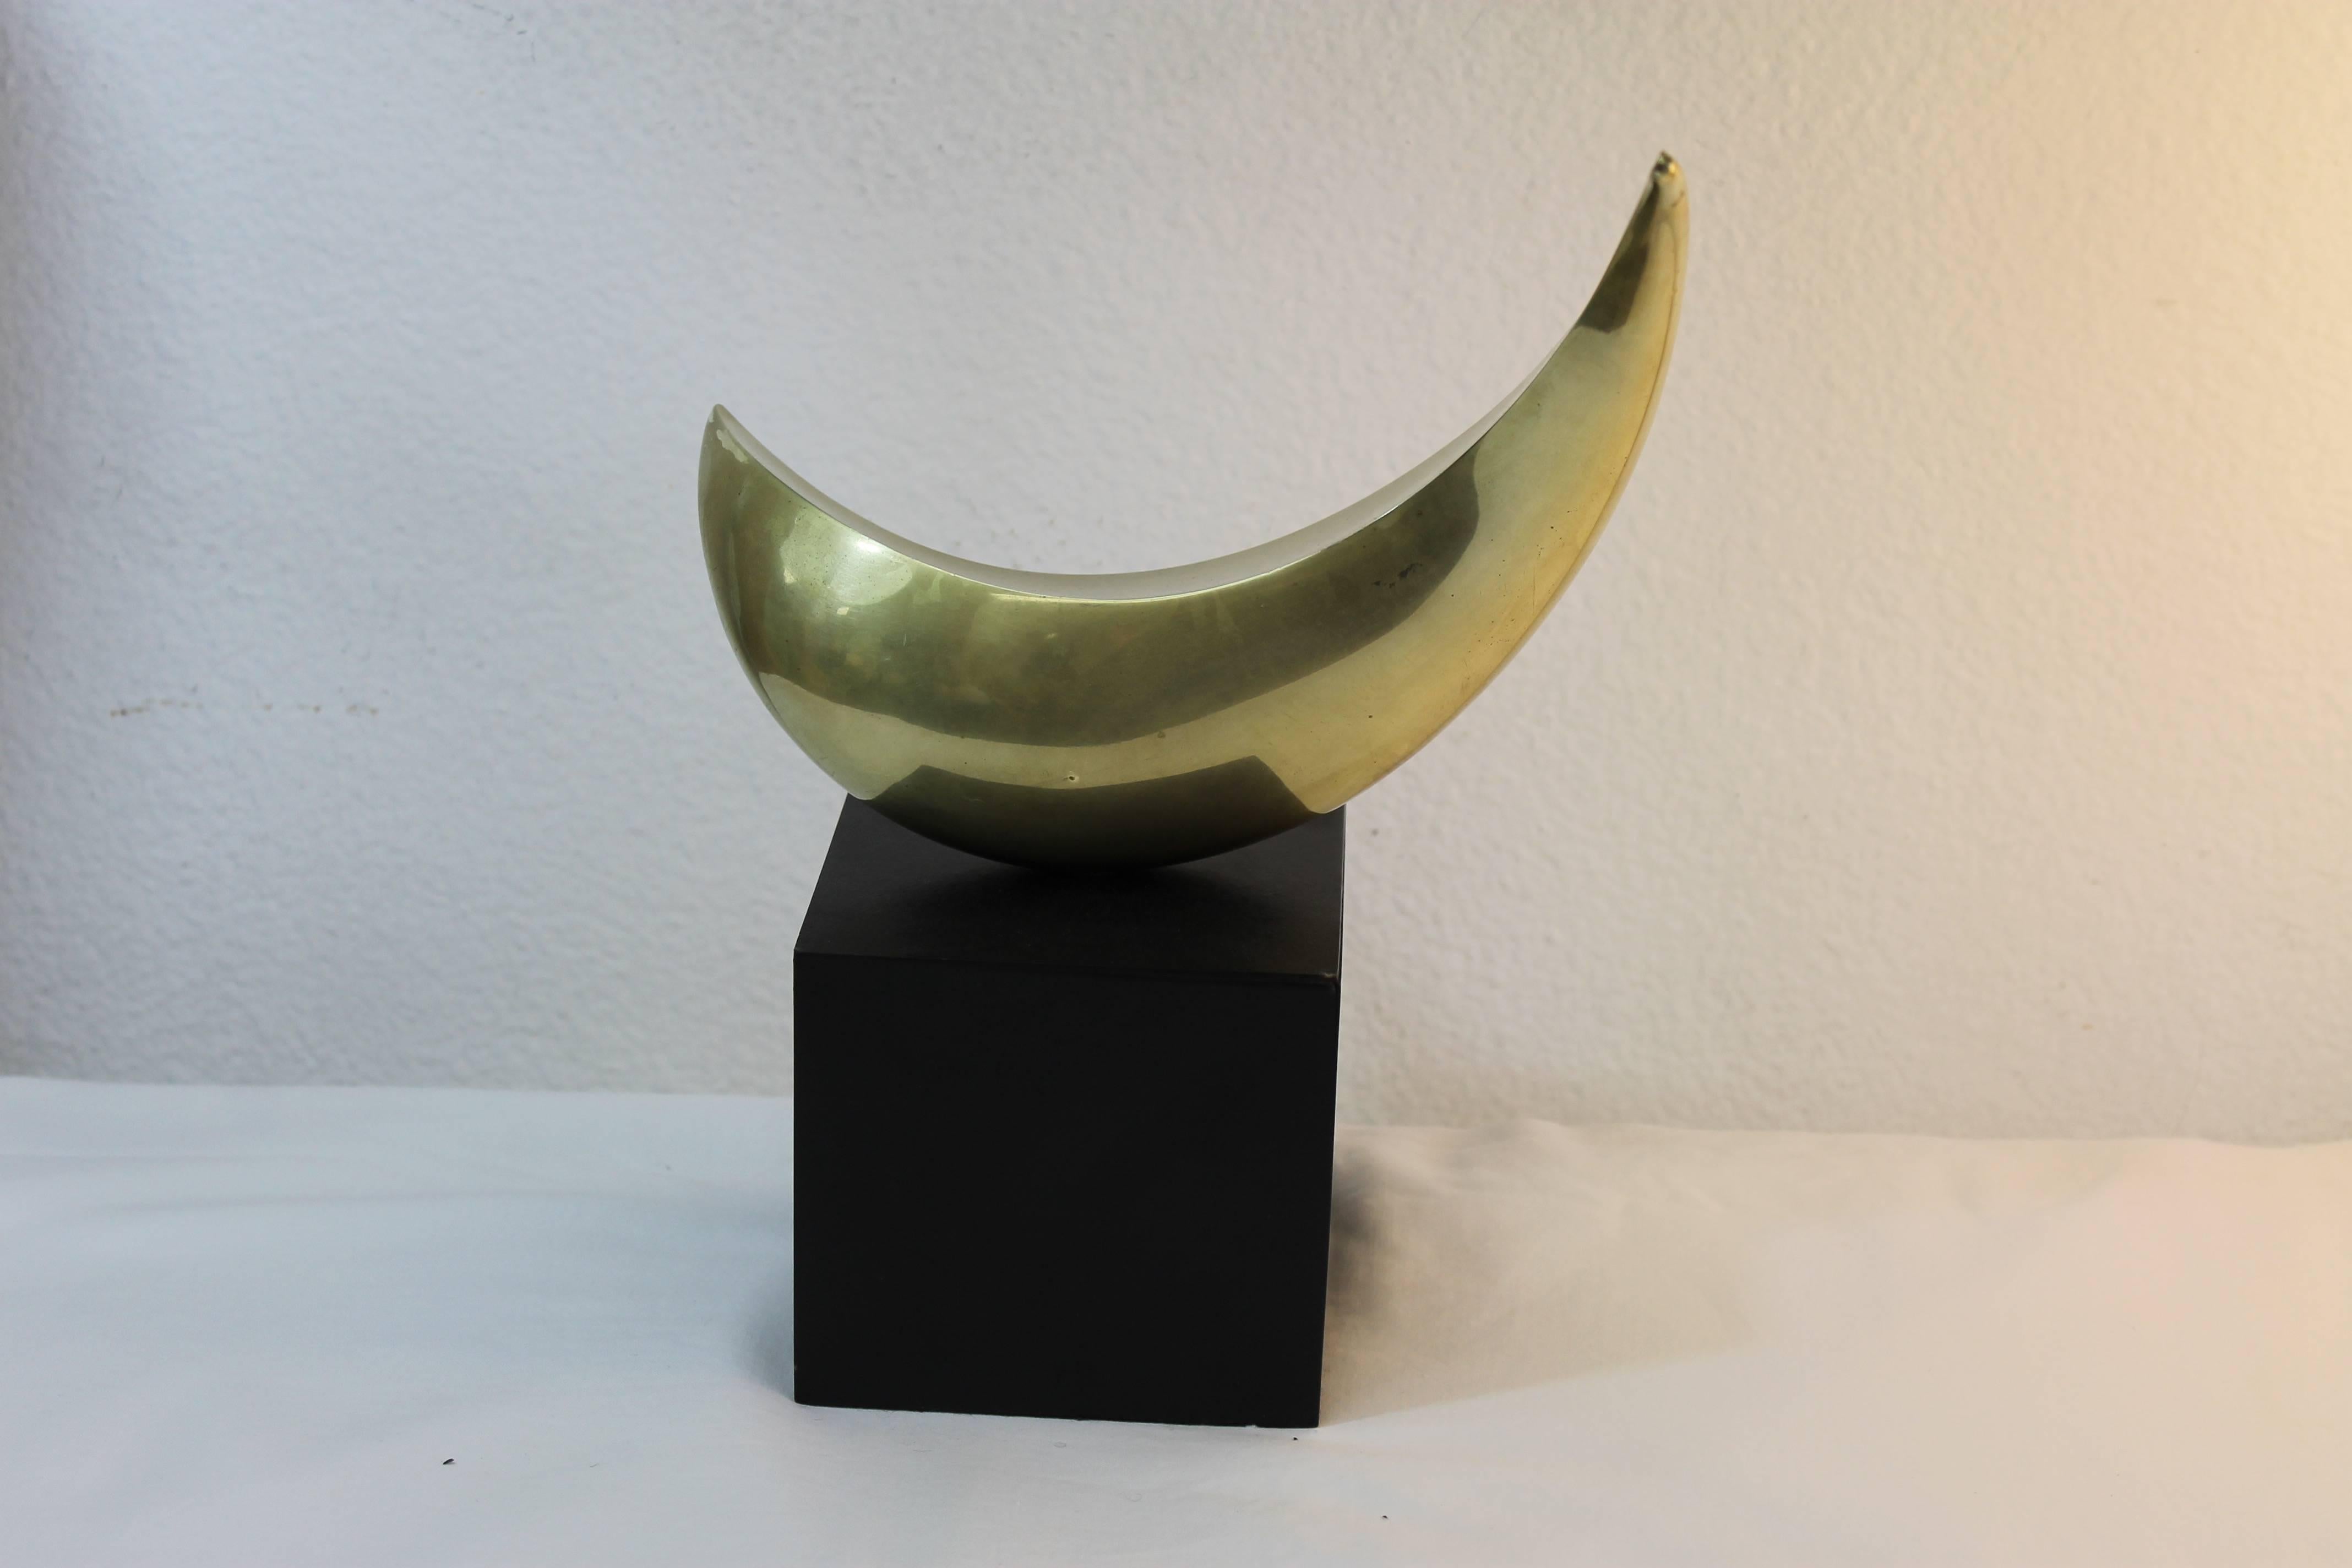 Hand forged one of a kind bronze sculpture by San Francisco artist Louis O. Pearson (1925-2005). Signed and dated 1974. Base measures 4.25" deep, 4.25" wide and 4" high. Brass sculpture is 9" wide, 3" deep and 7" high.